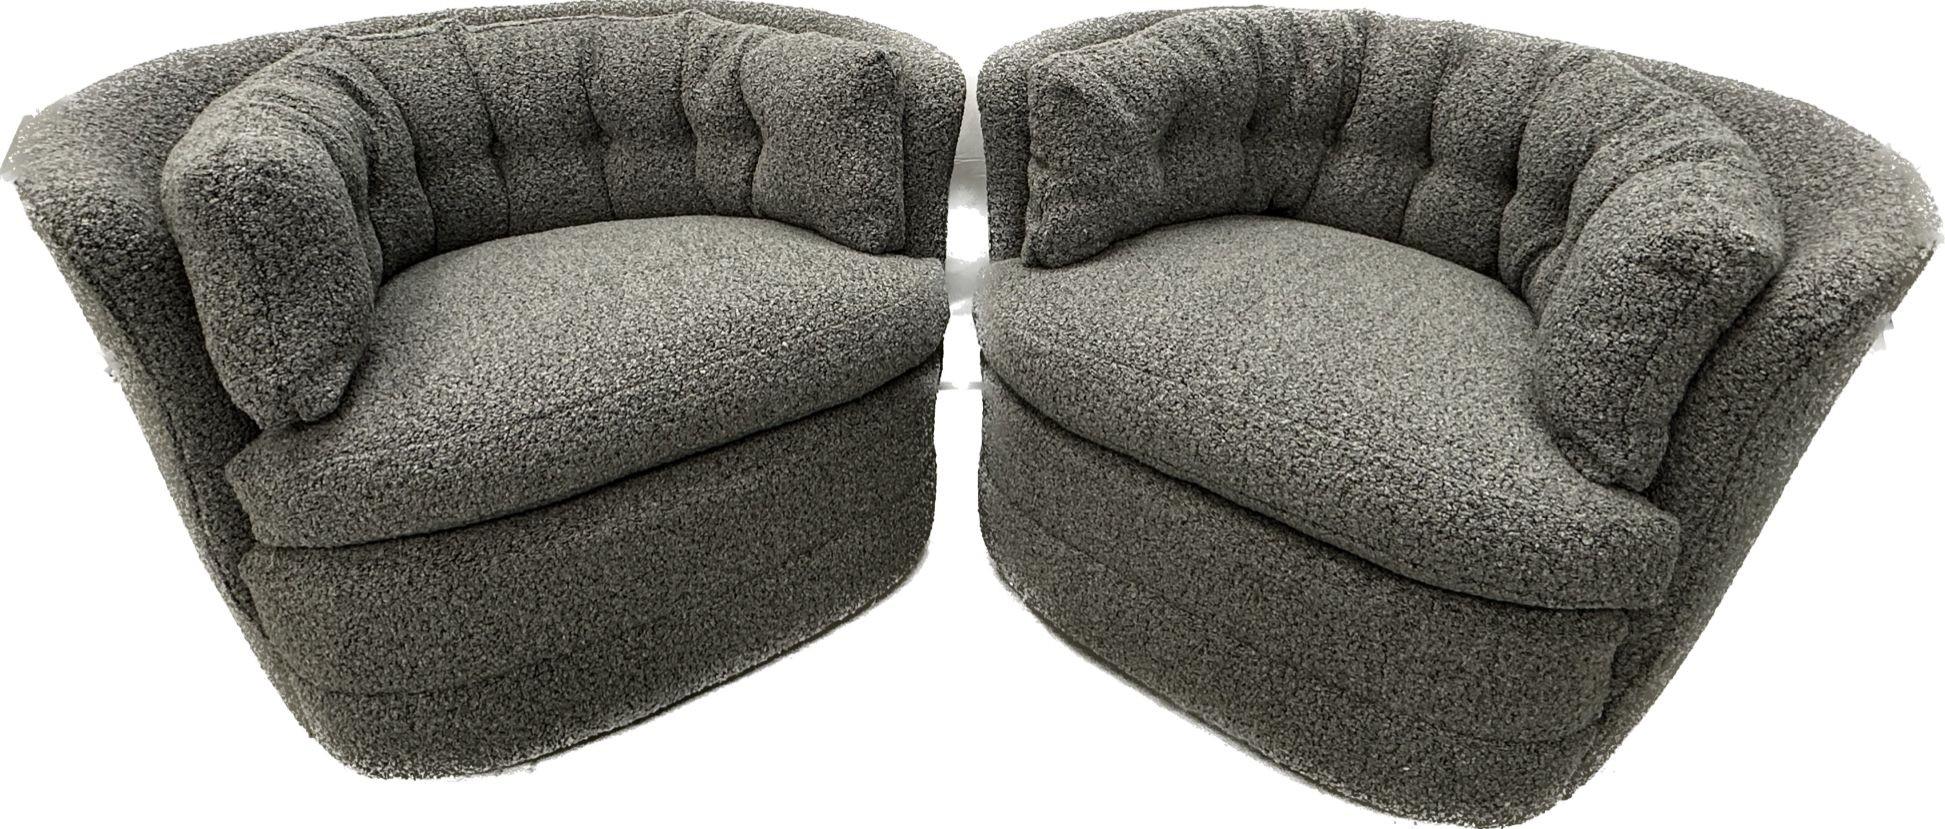 Mid-Century Modern style swivel, rolling lounge chairs, Baughman style, Boucle
Comfortable mid-century style rolling swivel chairs newly upholstered in a luxurious nubby gray boucle fabric. Having removable seat and back cushions. Each chair has a